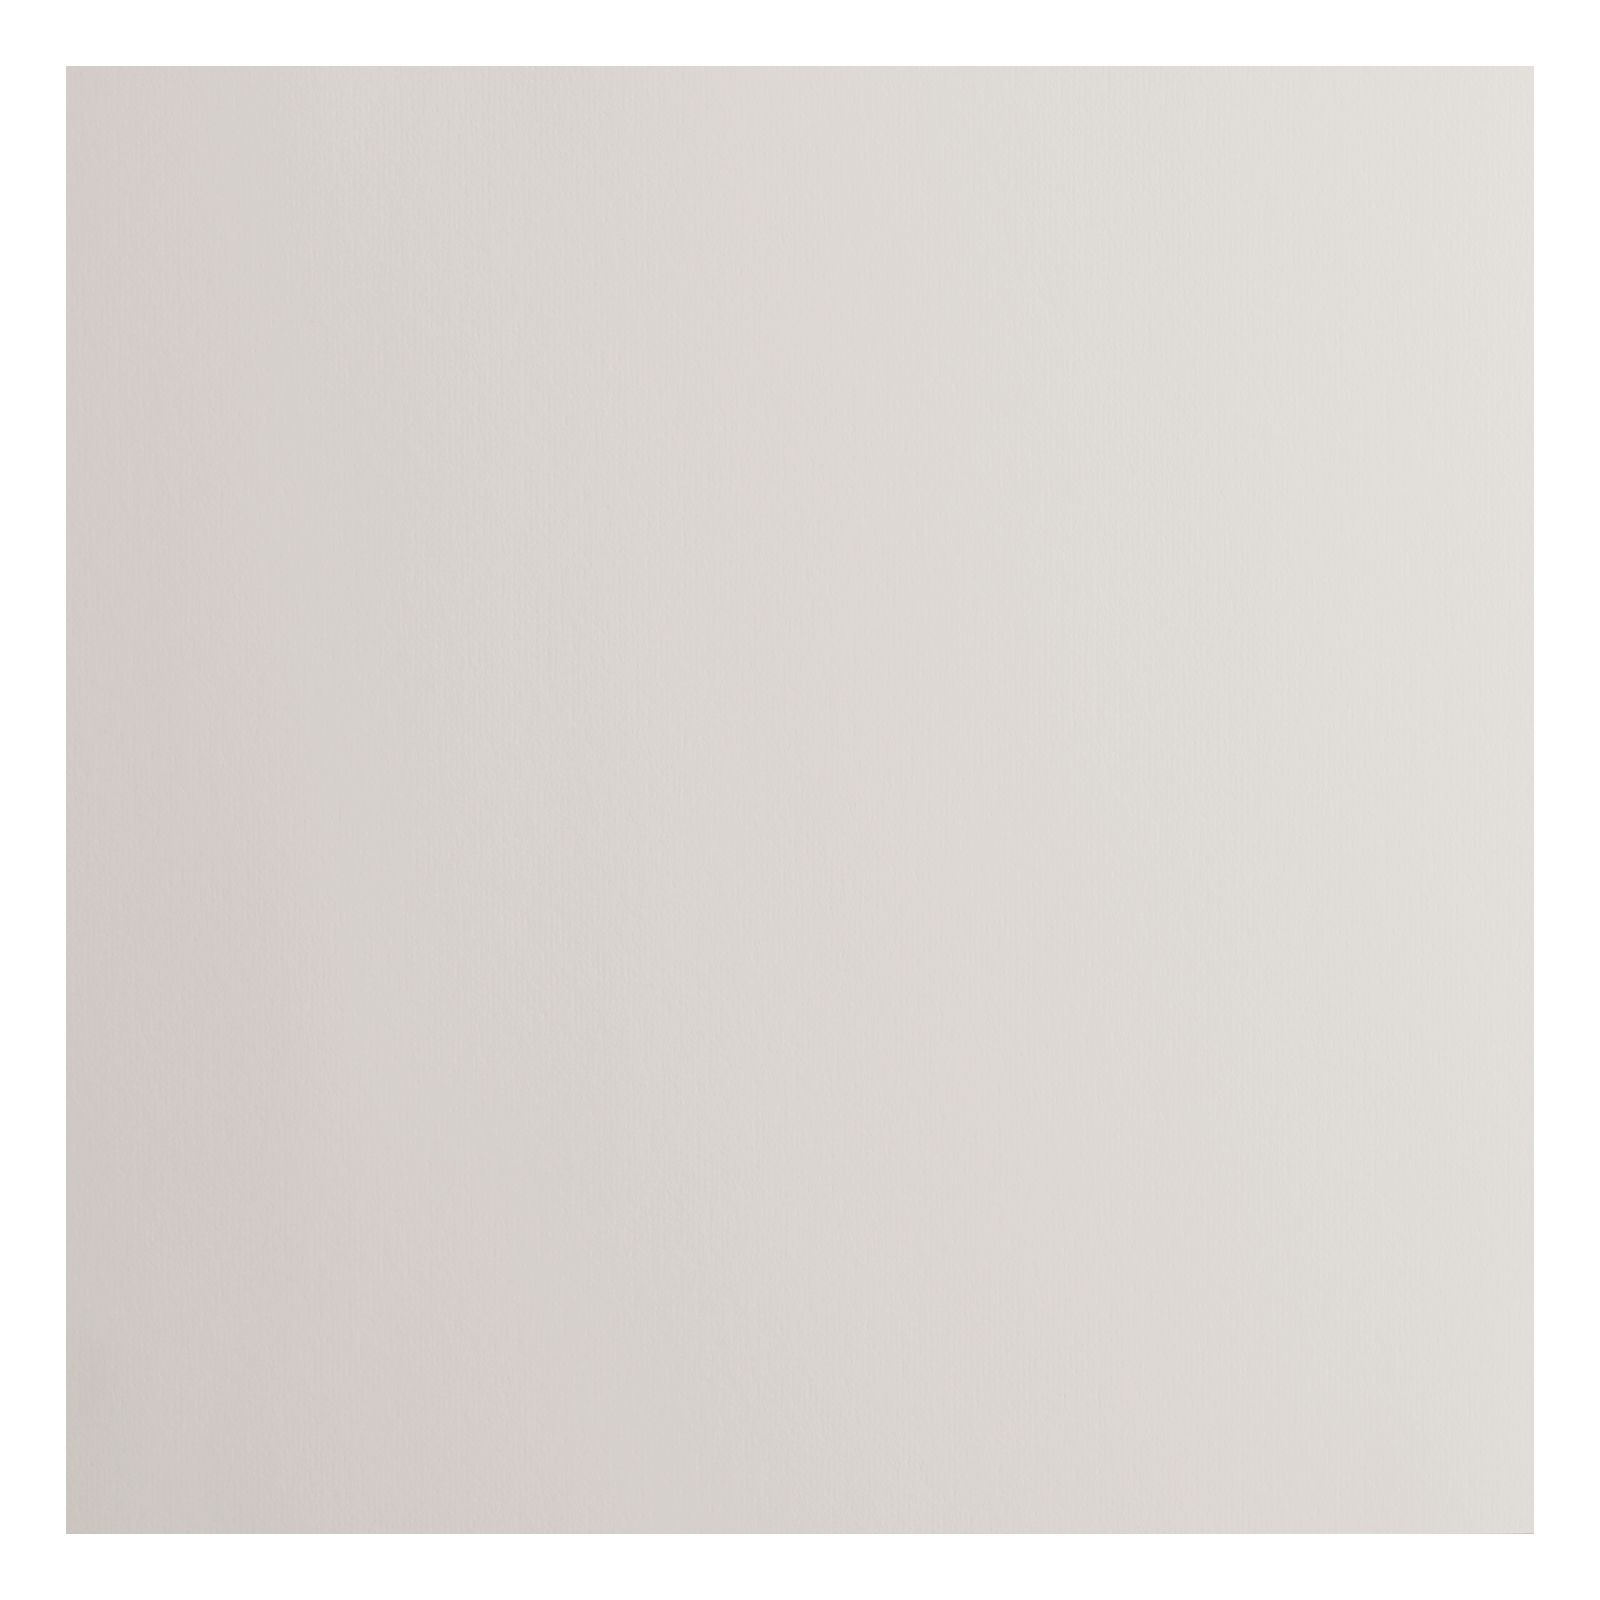 Florence • Cardstock Paper 216g Smooth 12x12" Cool Grey 20x